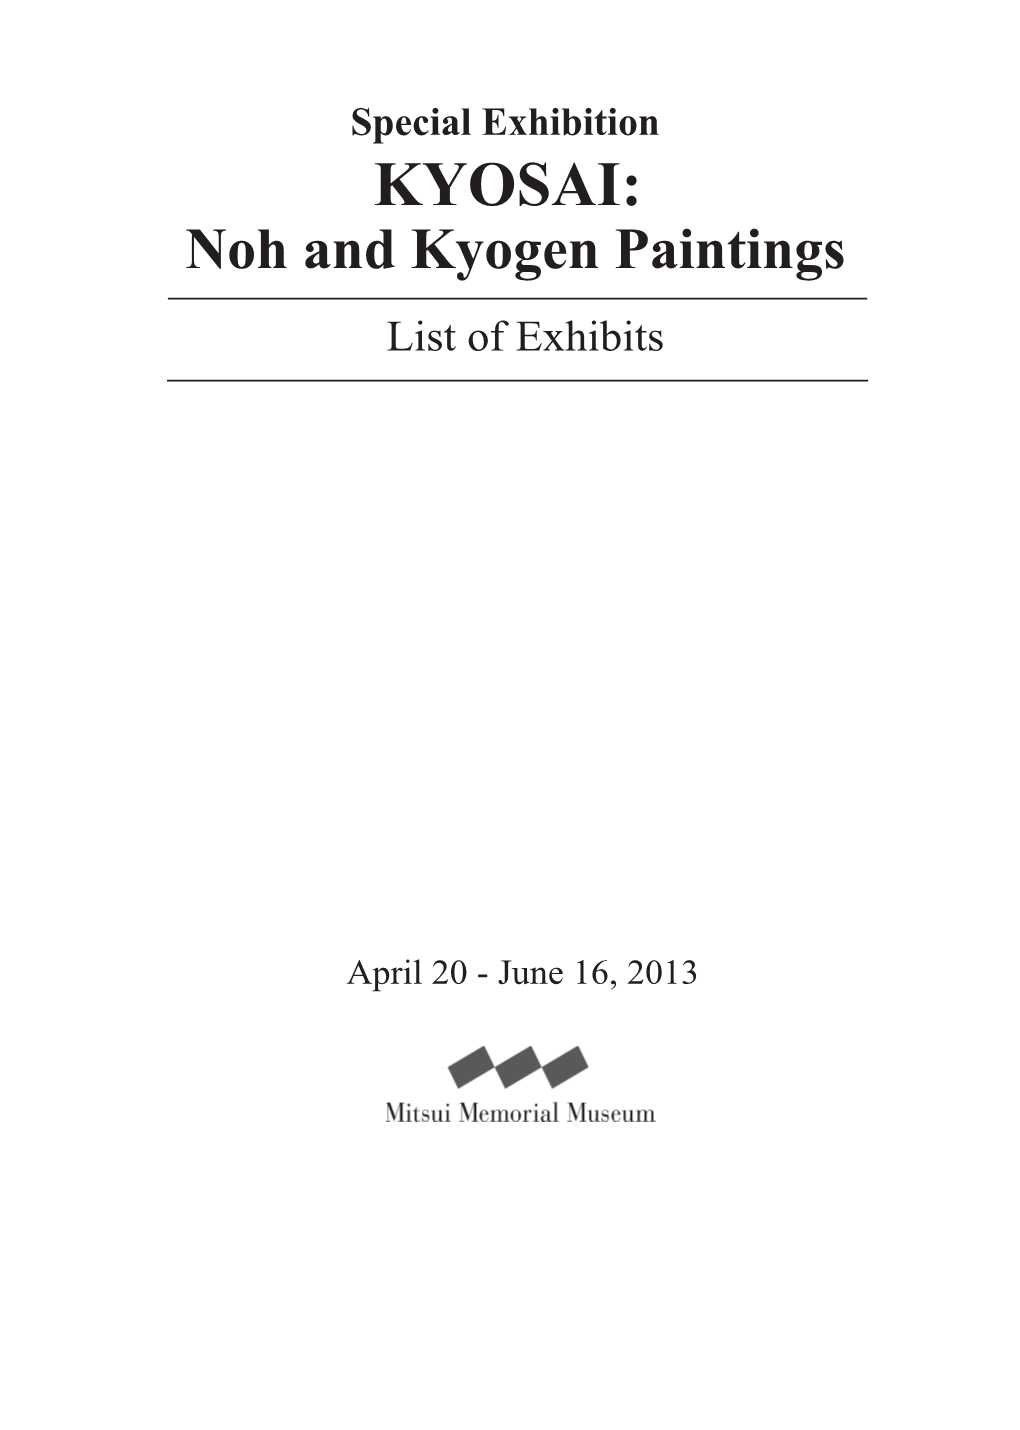 KYOSAI: Noh and Kyogen Paintings List of Exhibits